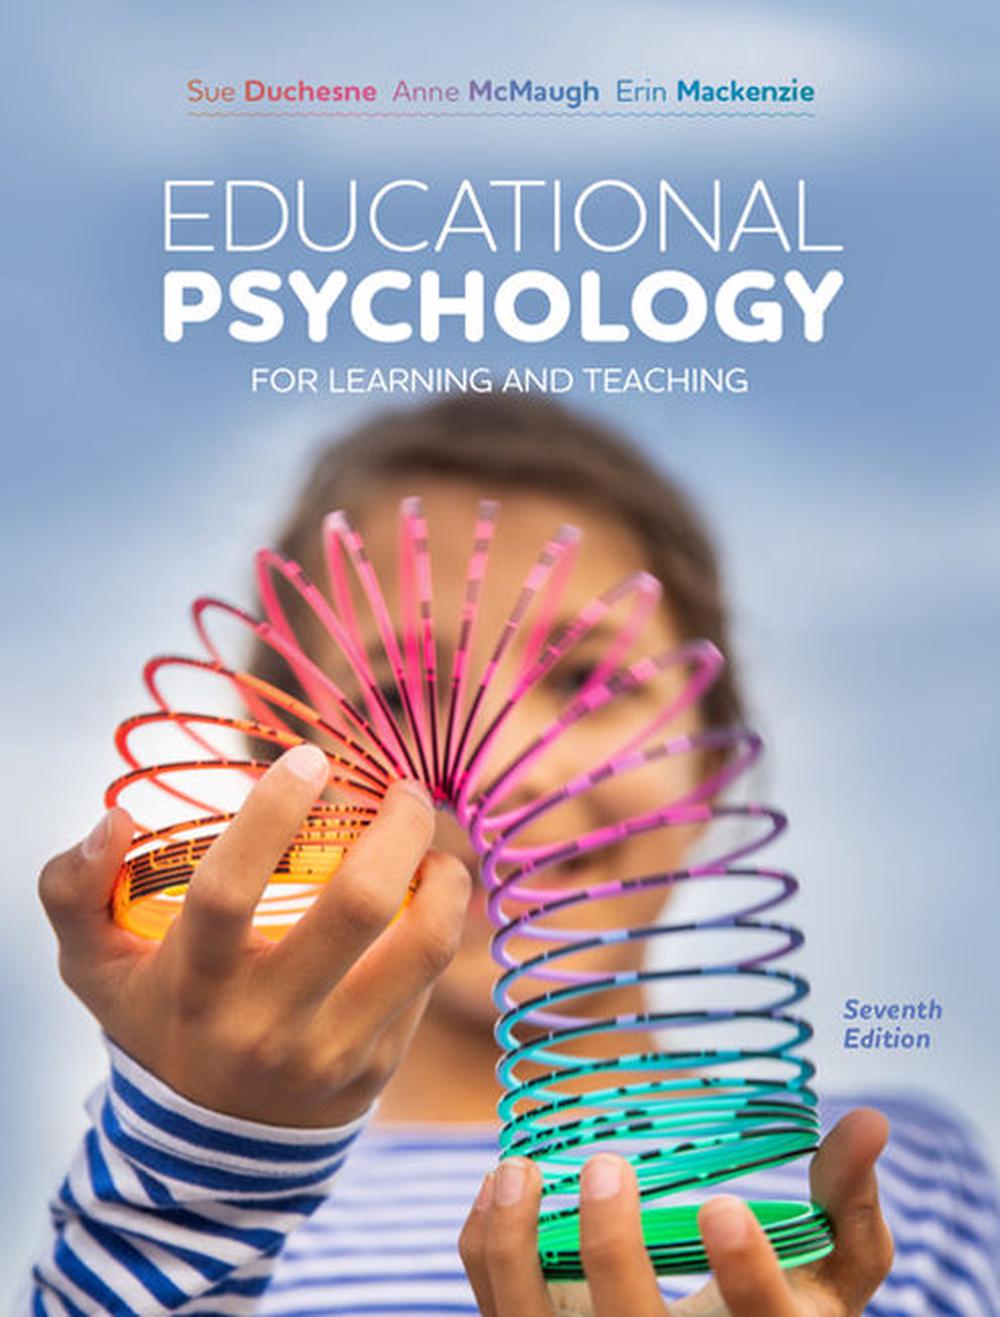 courses in educational psychology